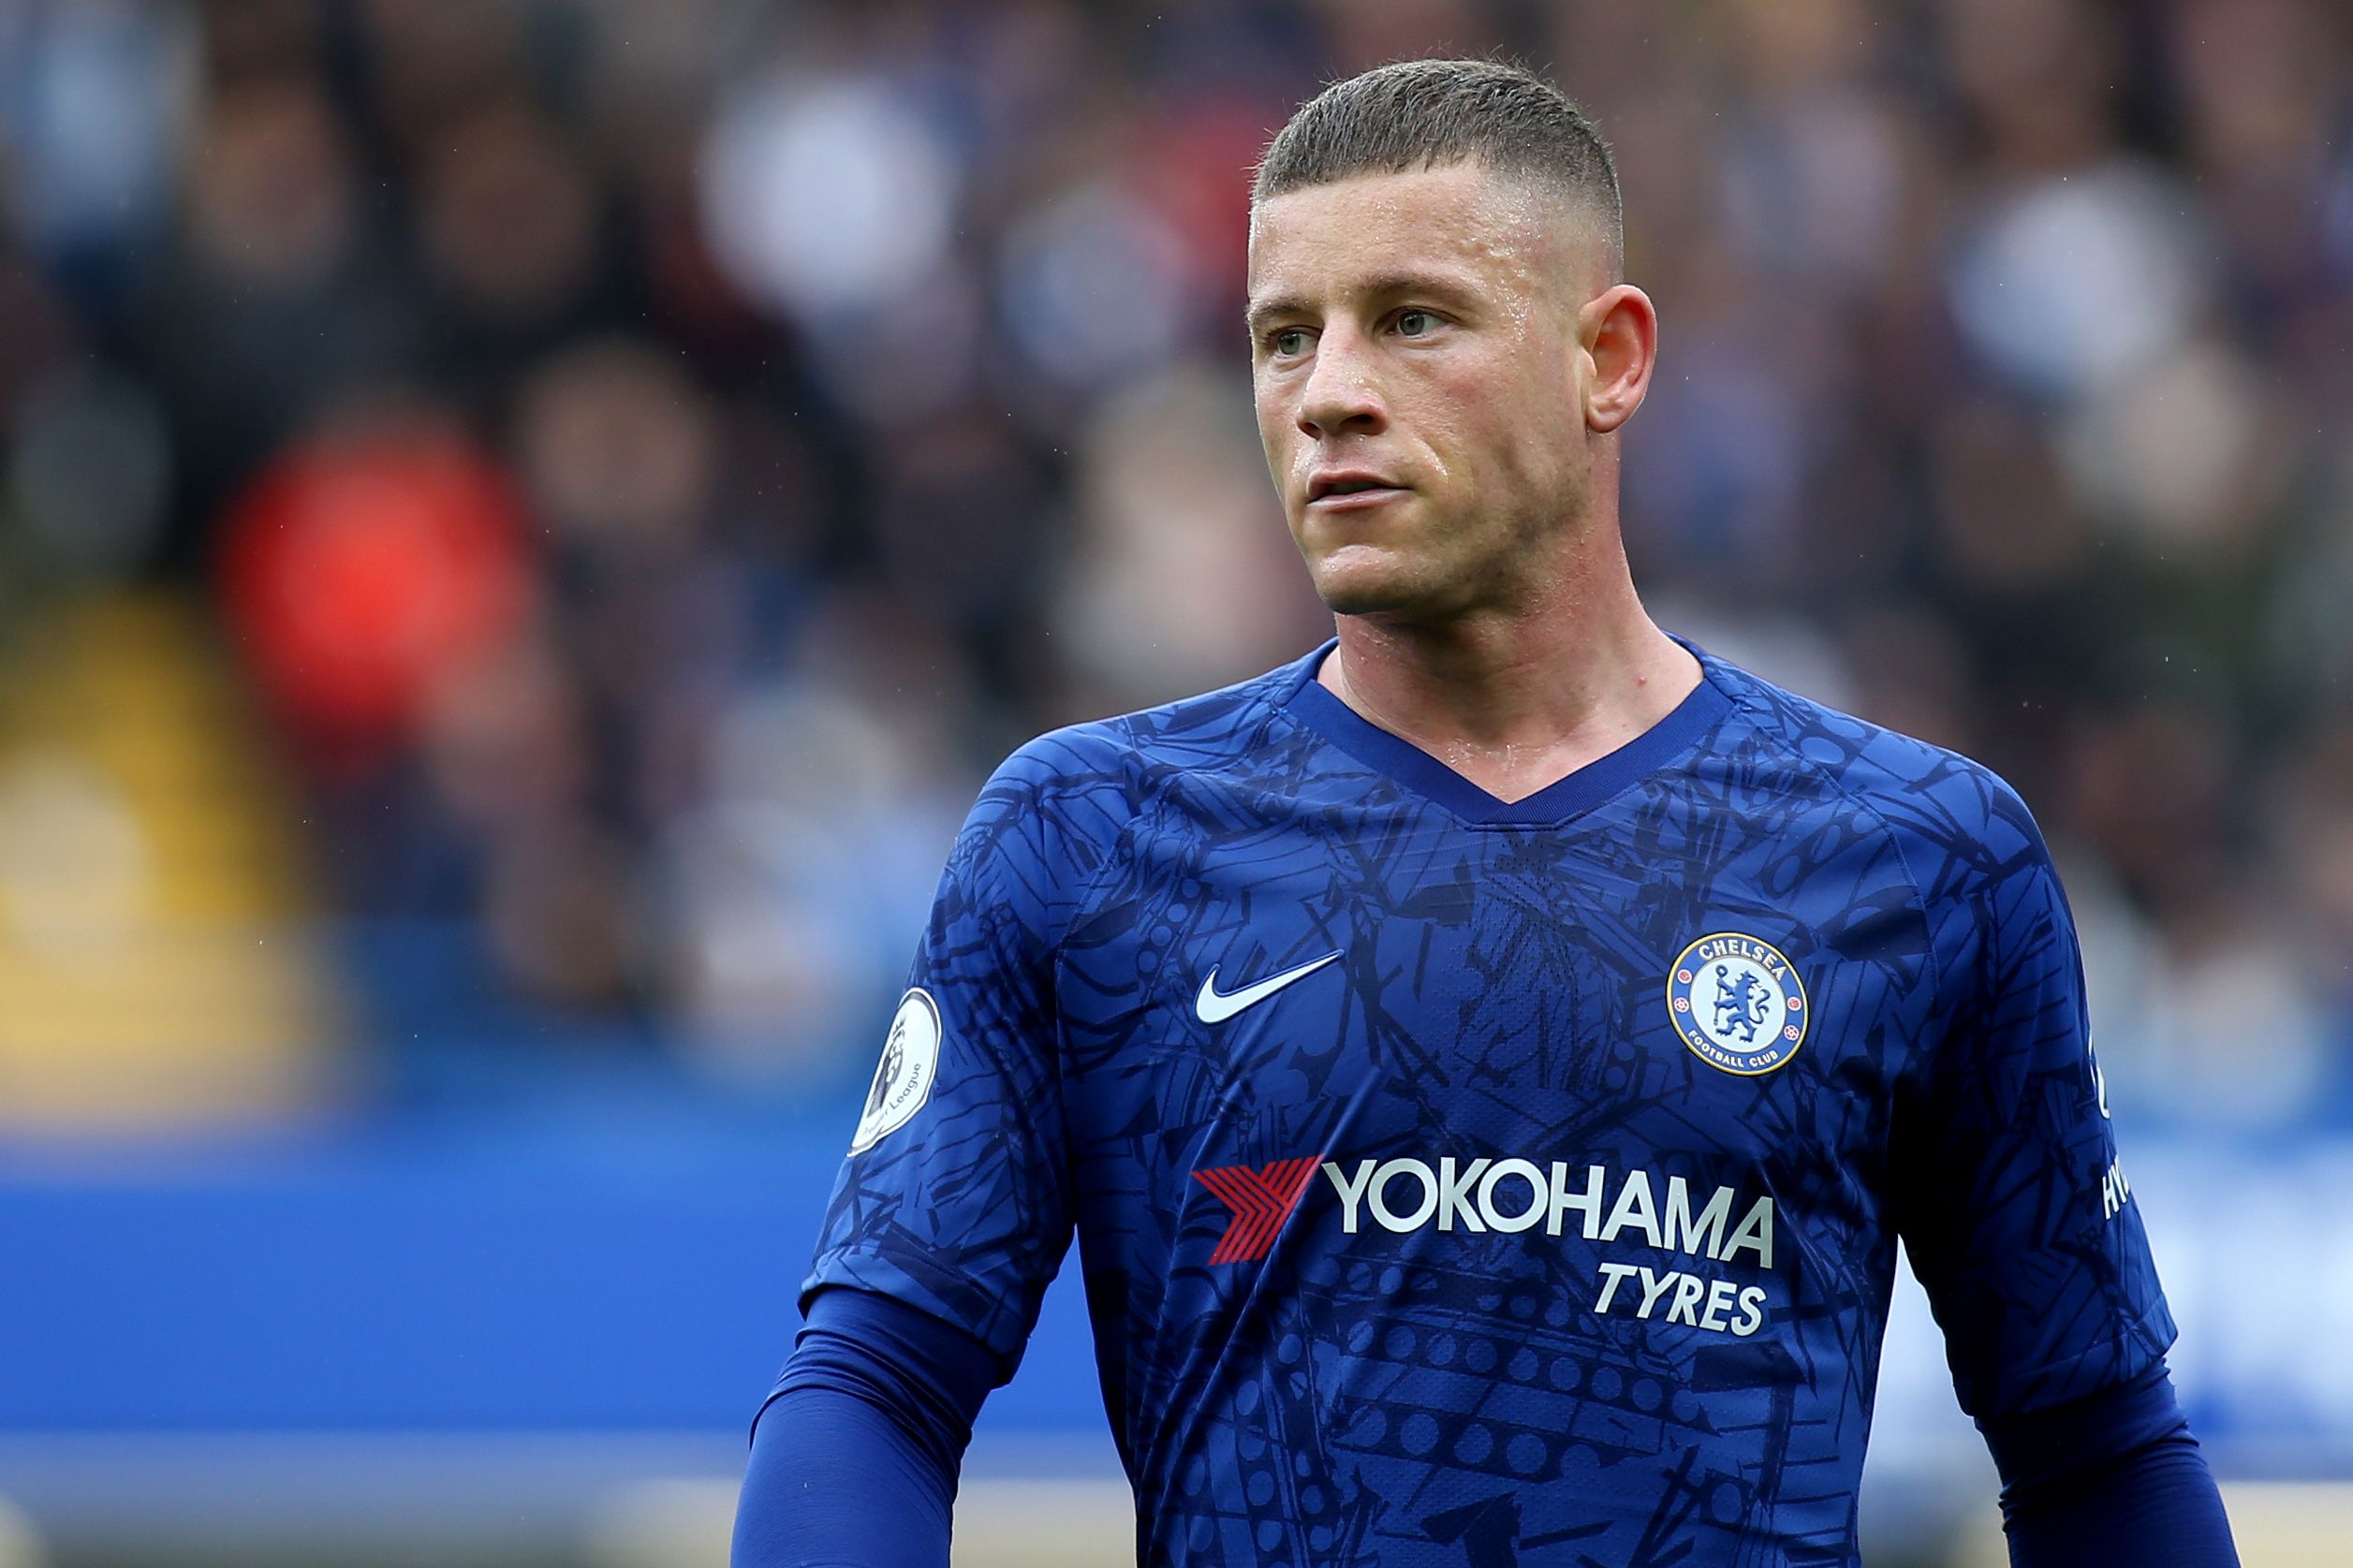 Ross Barkley was found to have taken several breaks.